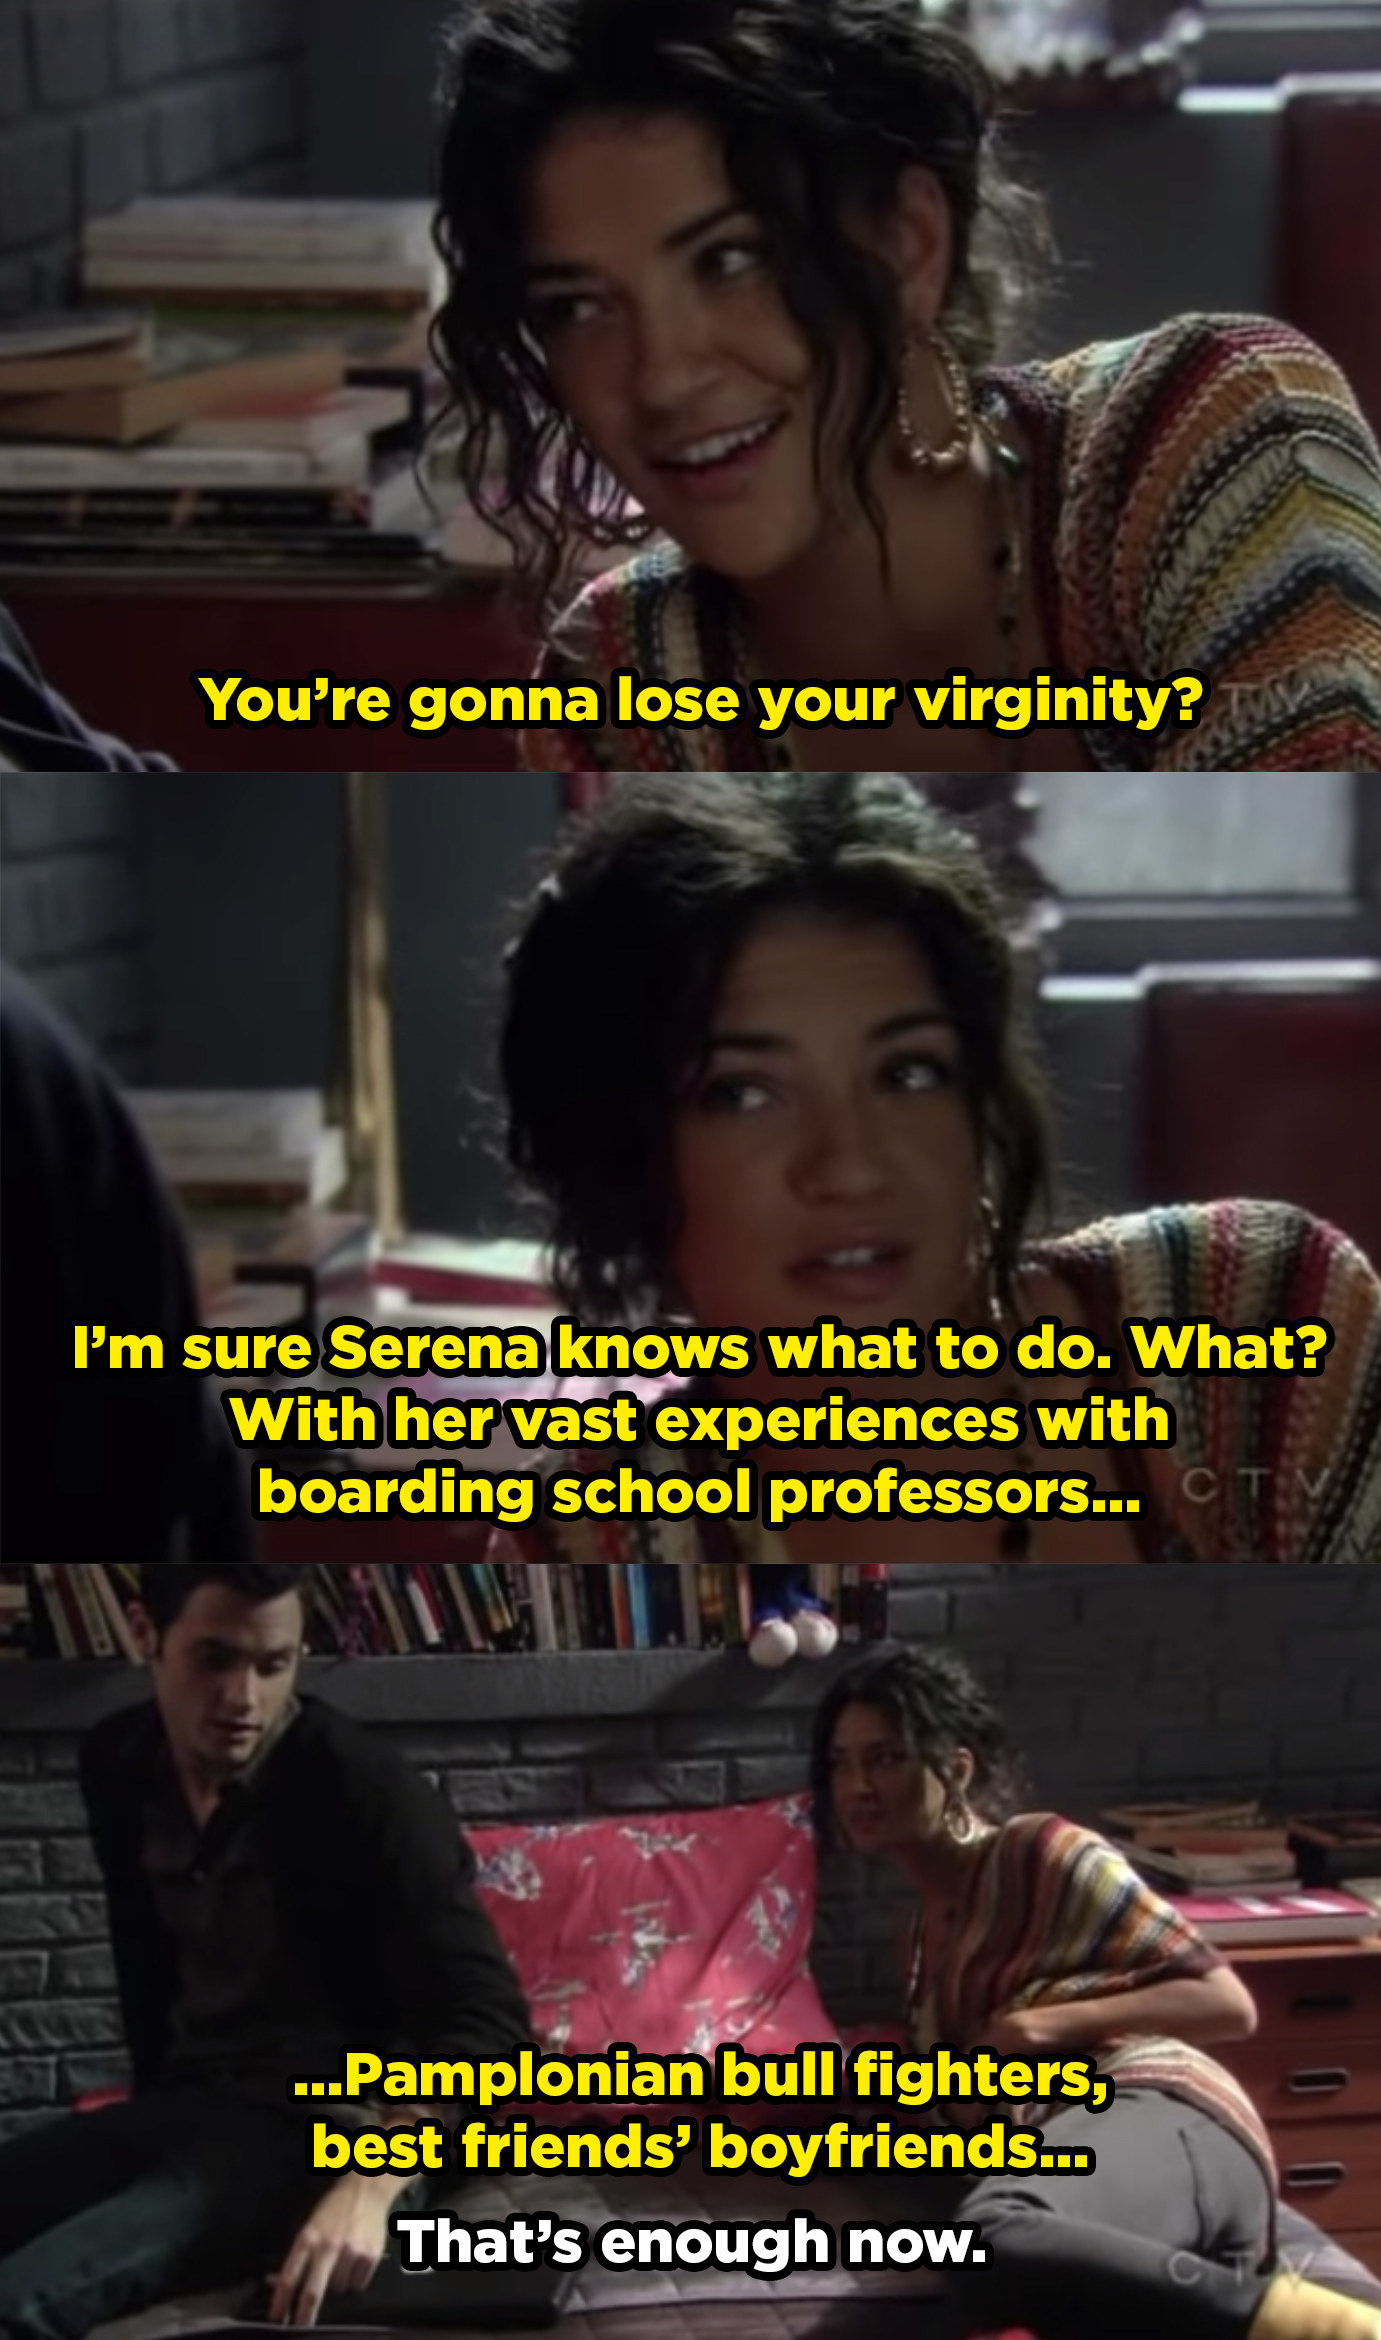 Vanessa slut-shaming Serena saying she probably has a lot of experience from hooking up with professors and her best friends' boyfriends.